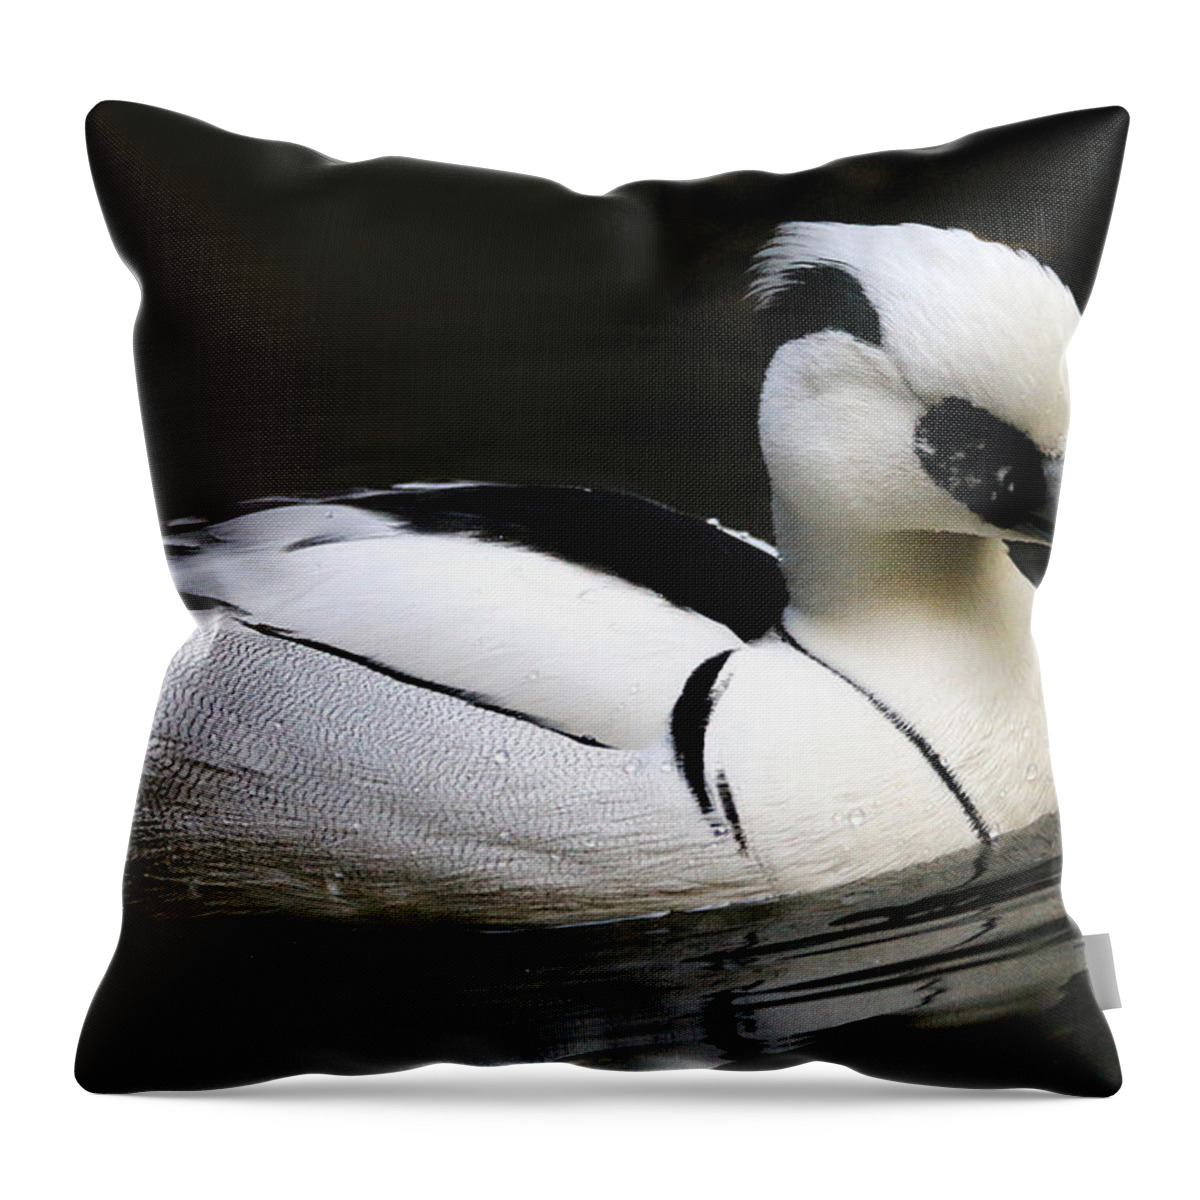 Smew Throw Pillow featuring the photograph Smew by Living Color Photography Lorraine Lynch